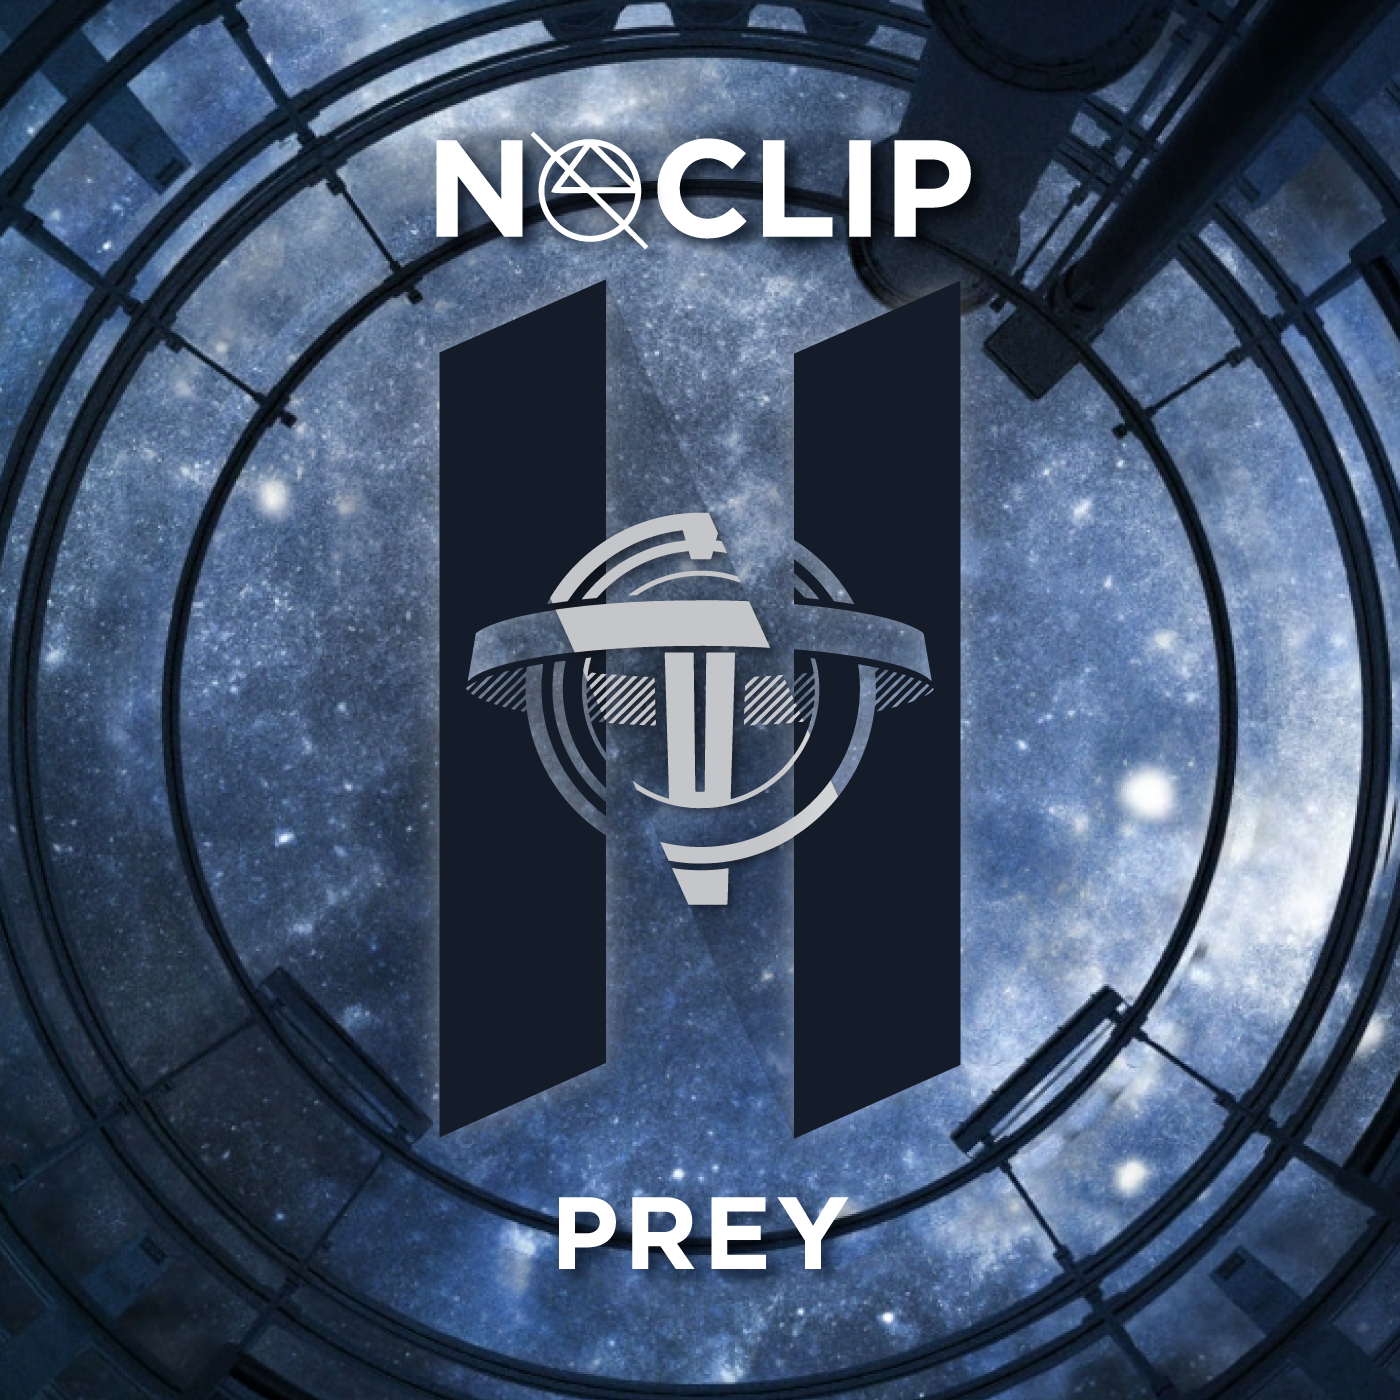 The Noclip Podcast podcast